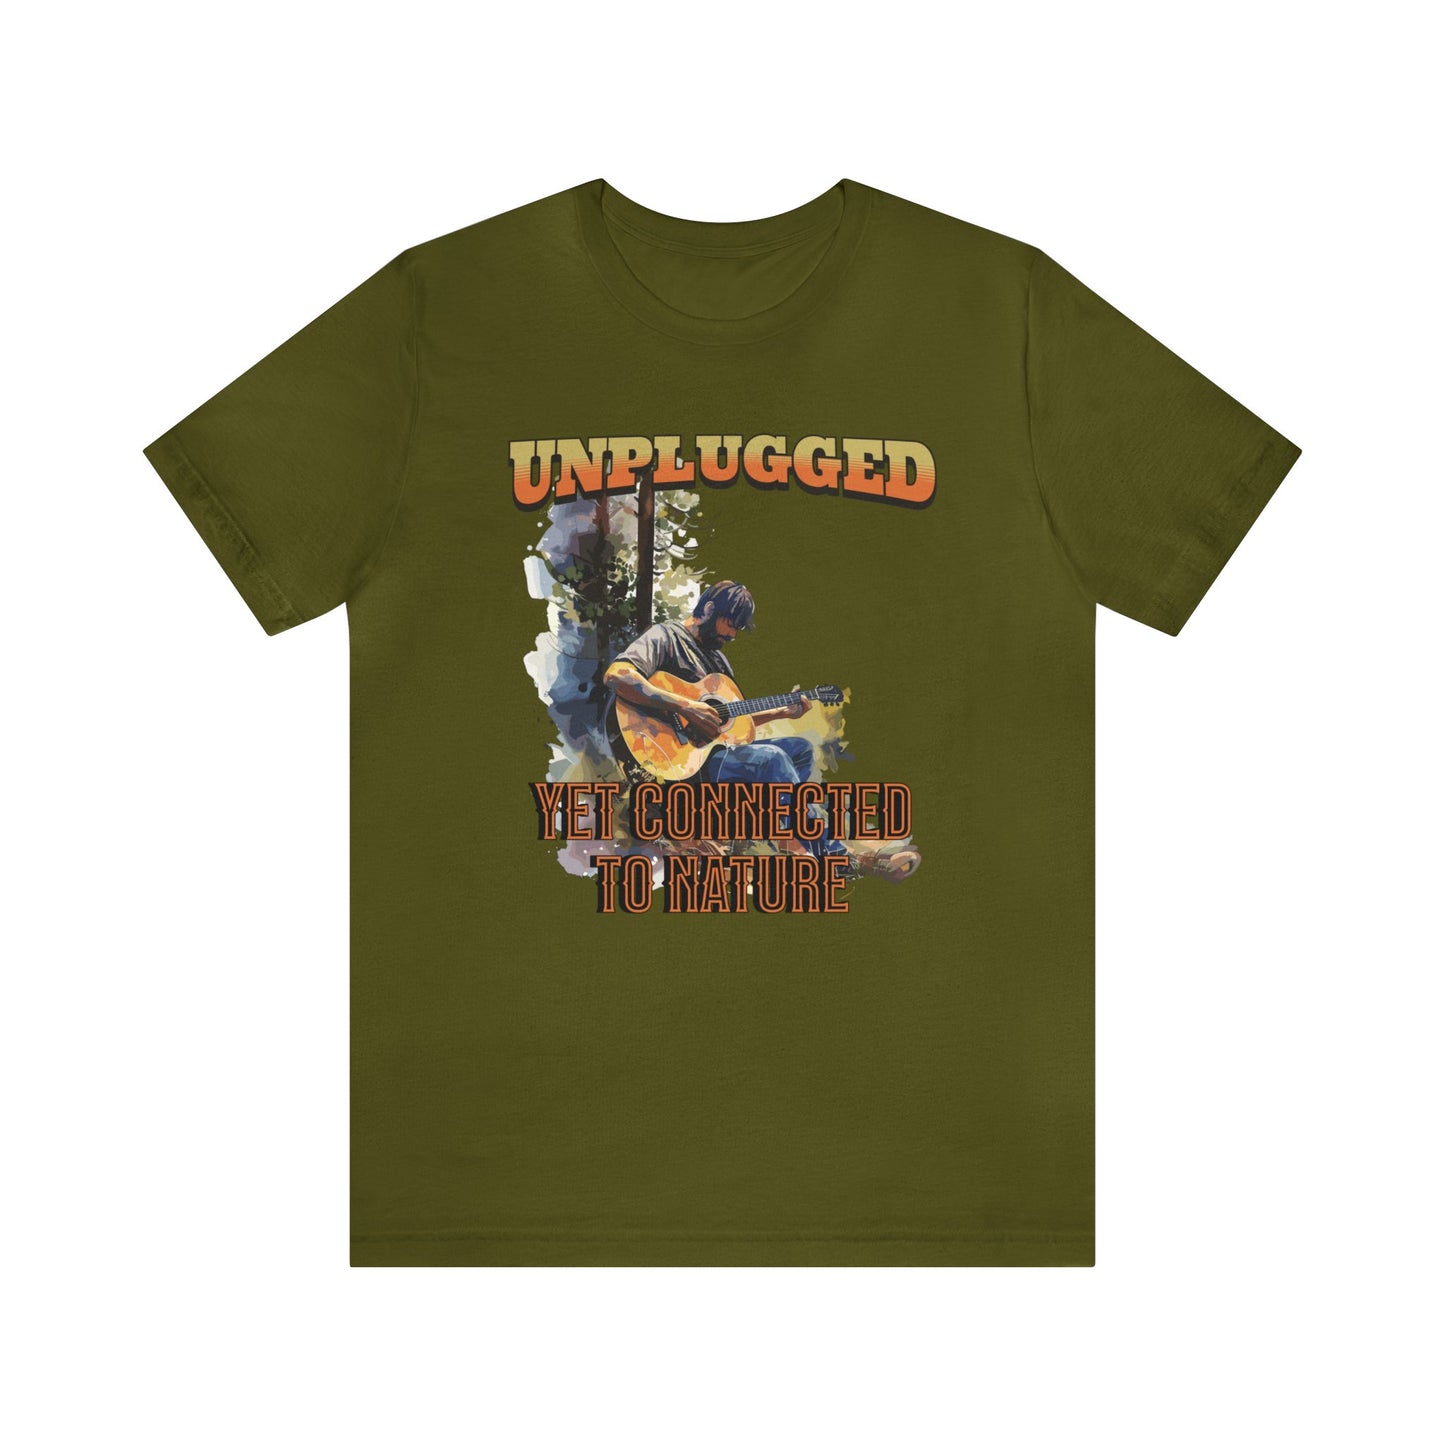 Unplugged, Yet Connected to Nature T-shirt.